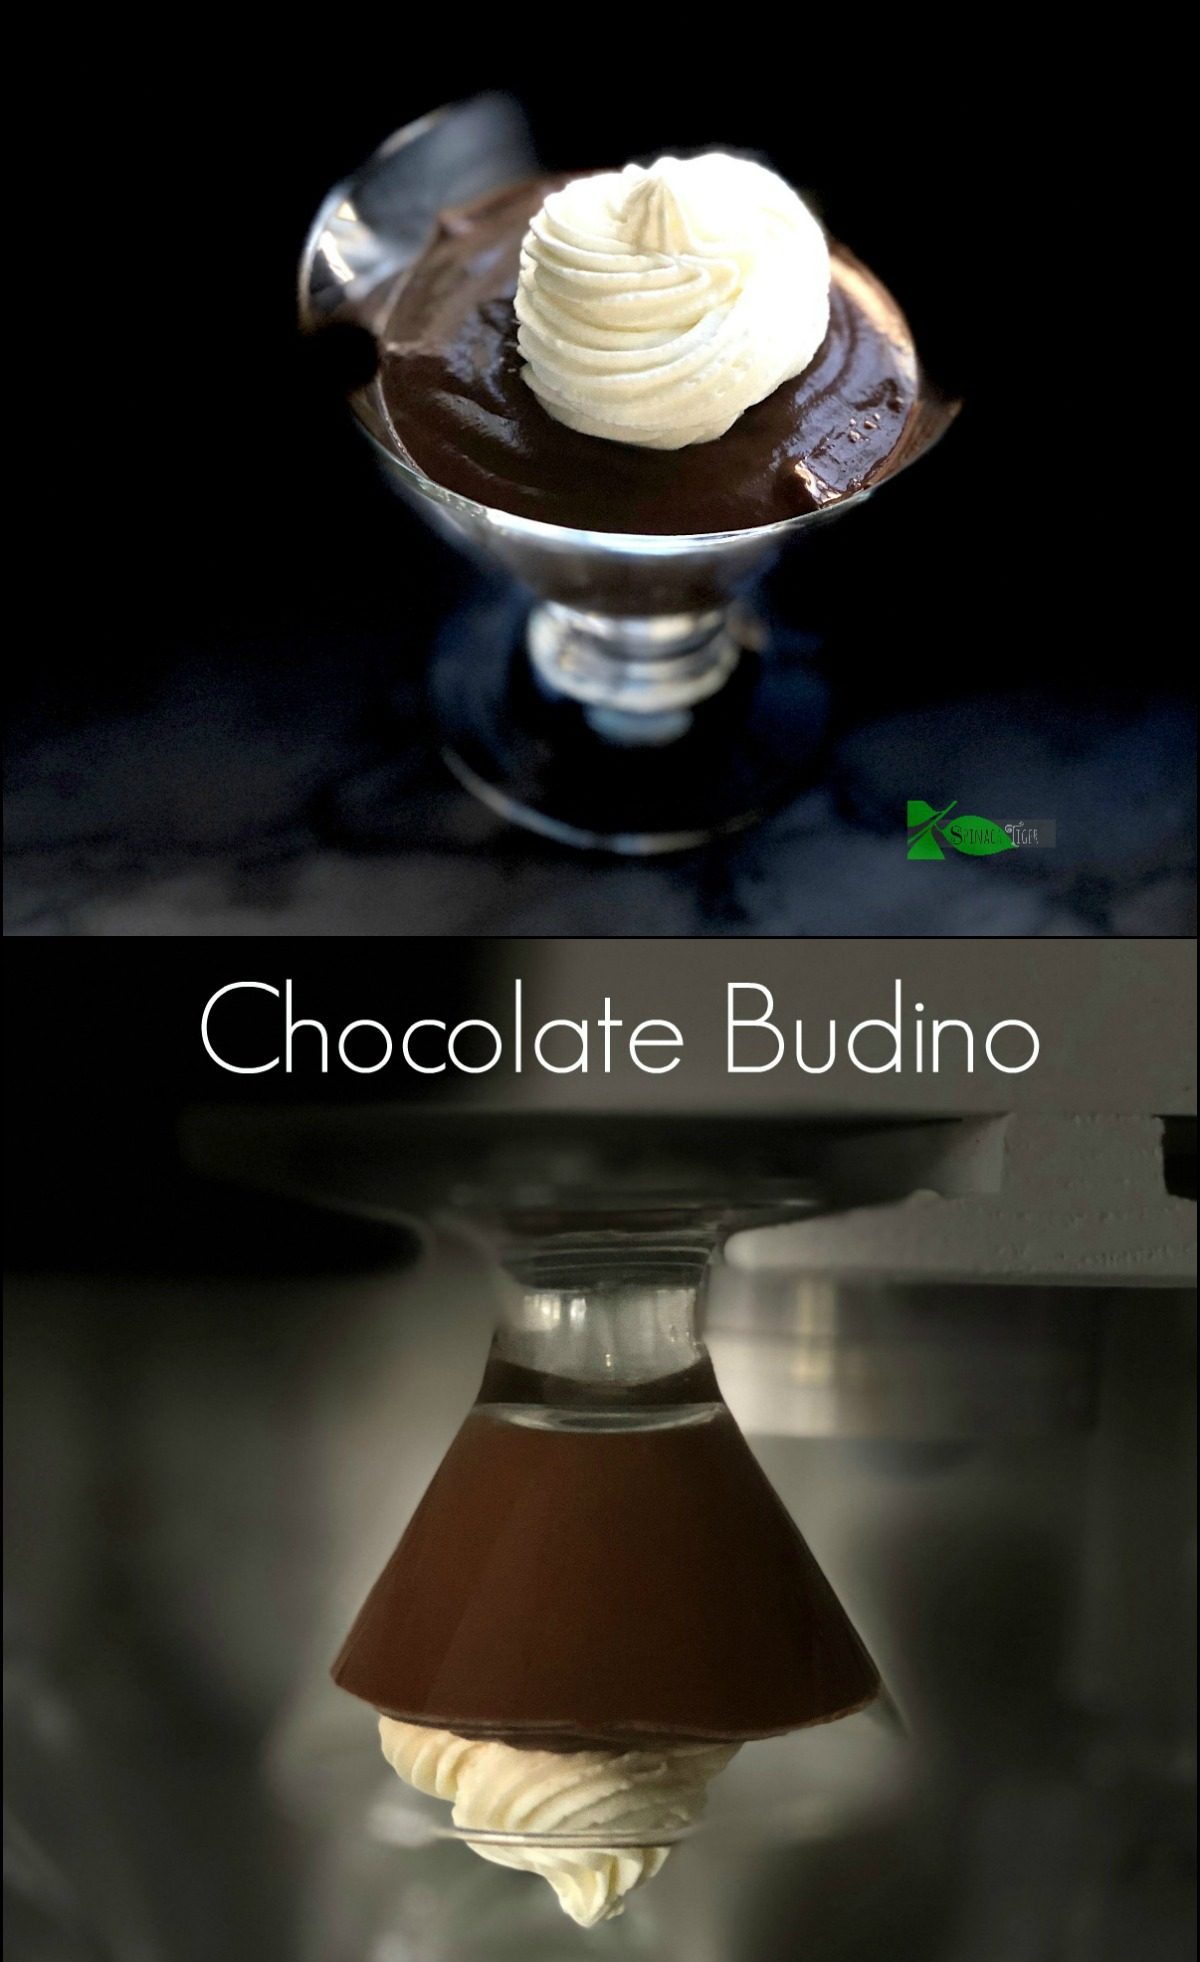 chocolate budino recipe from Spinach Tiger